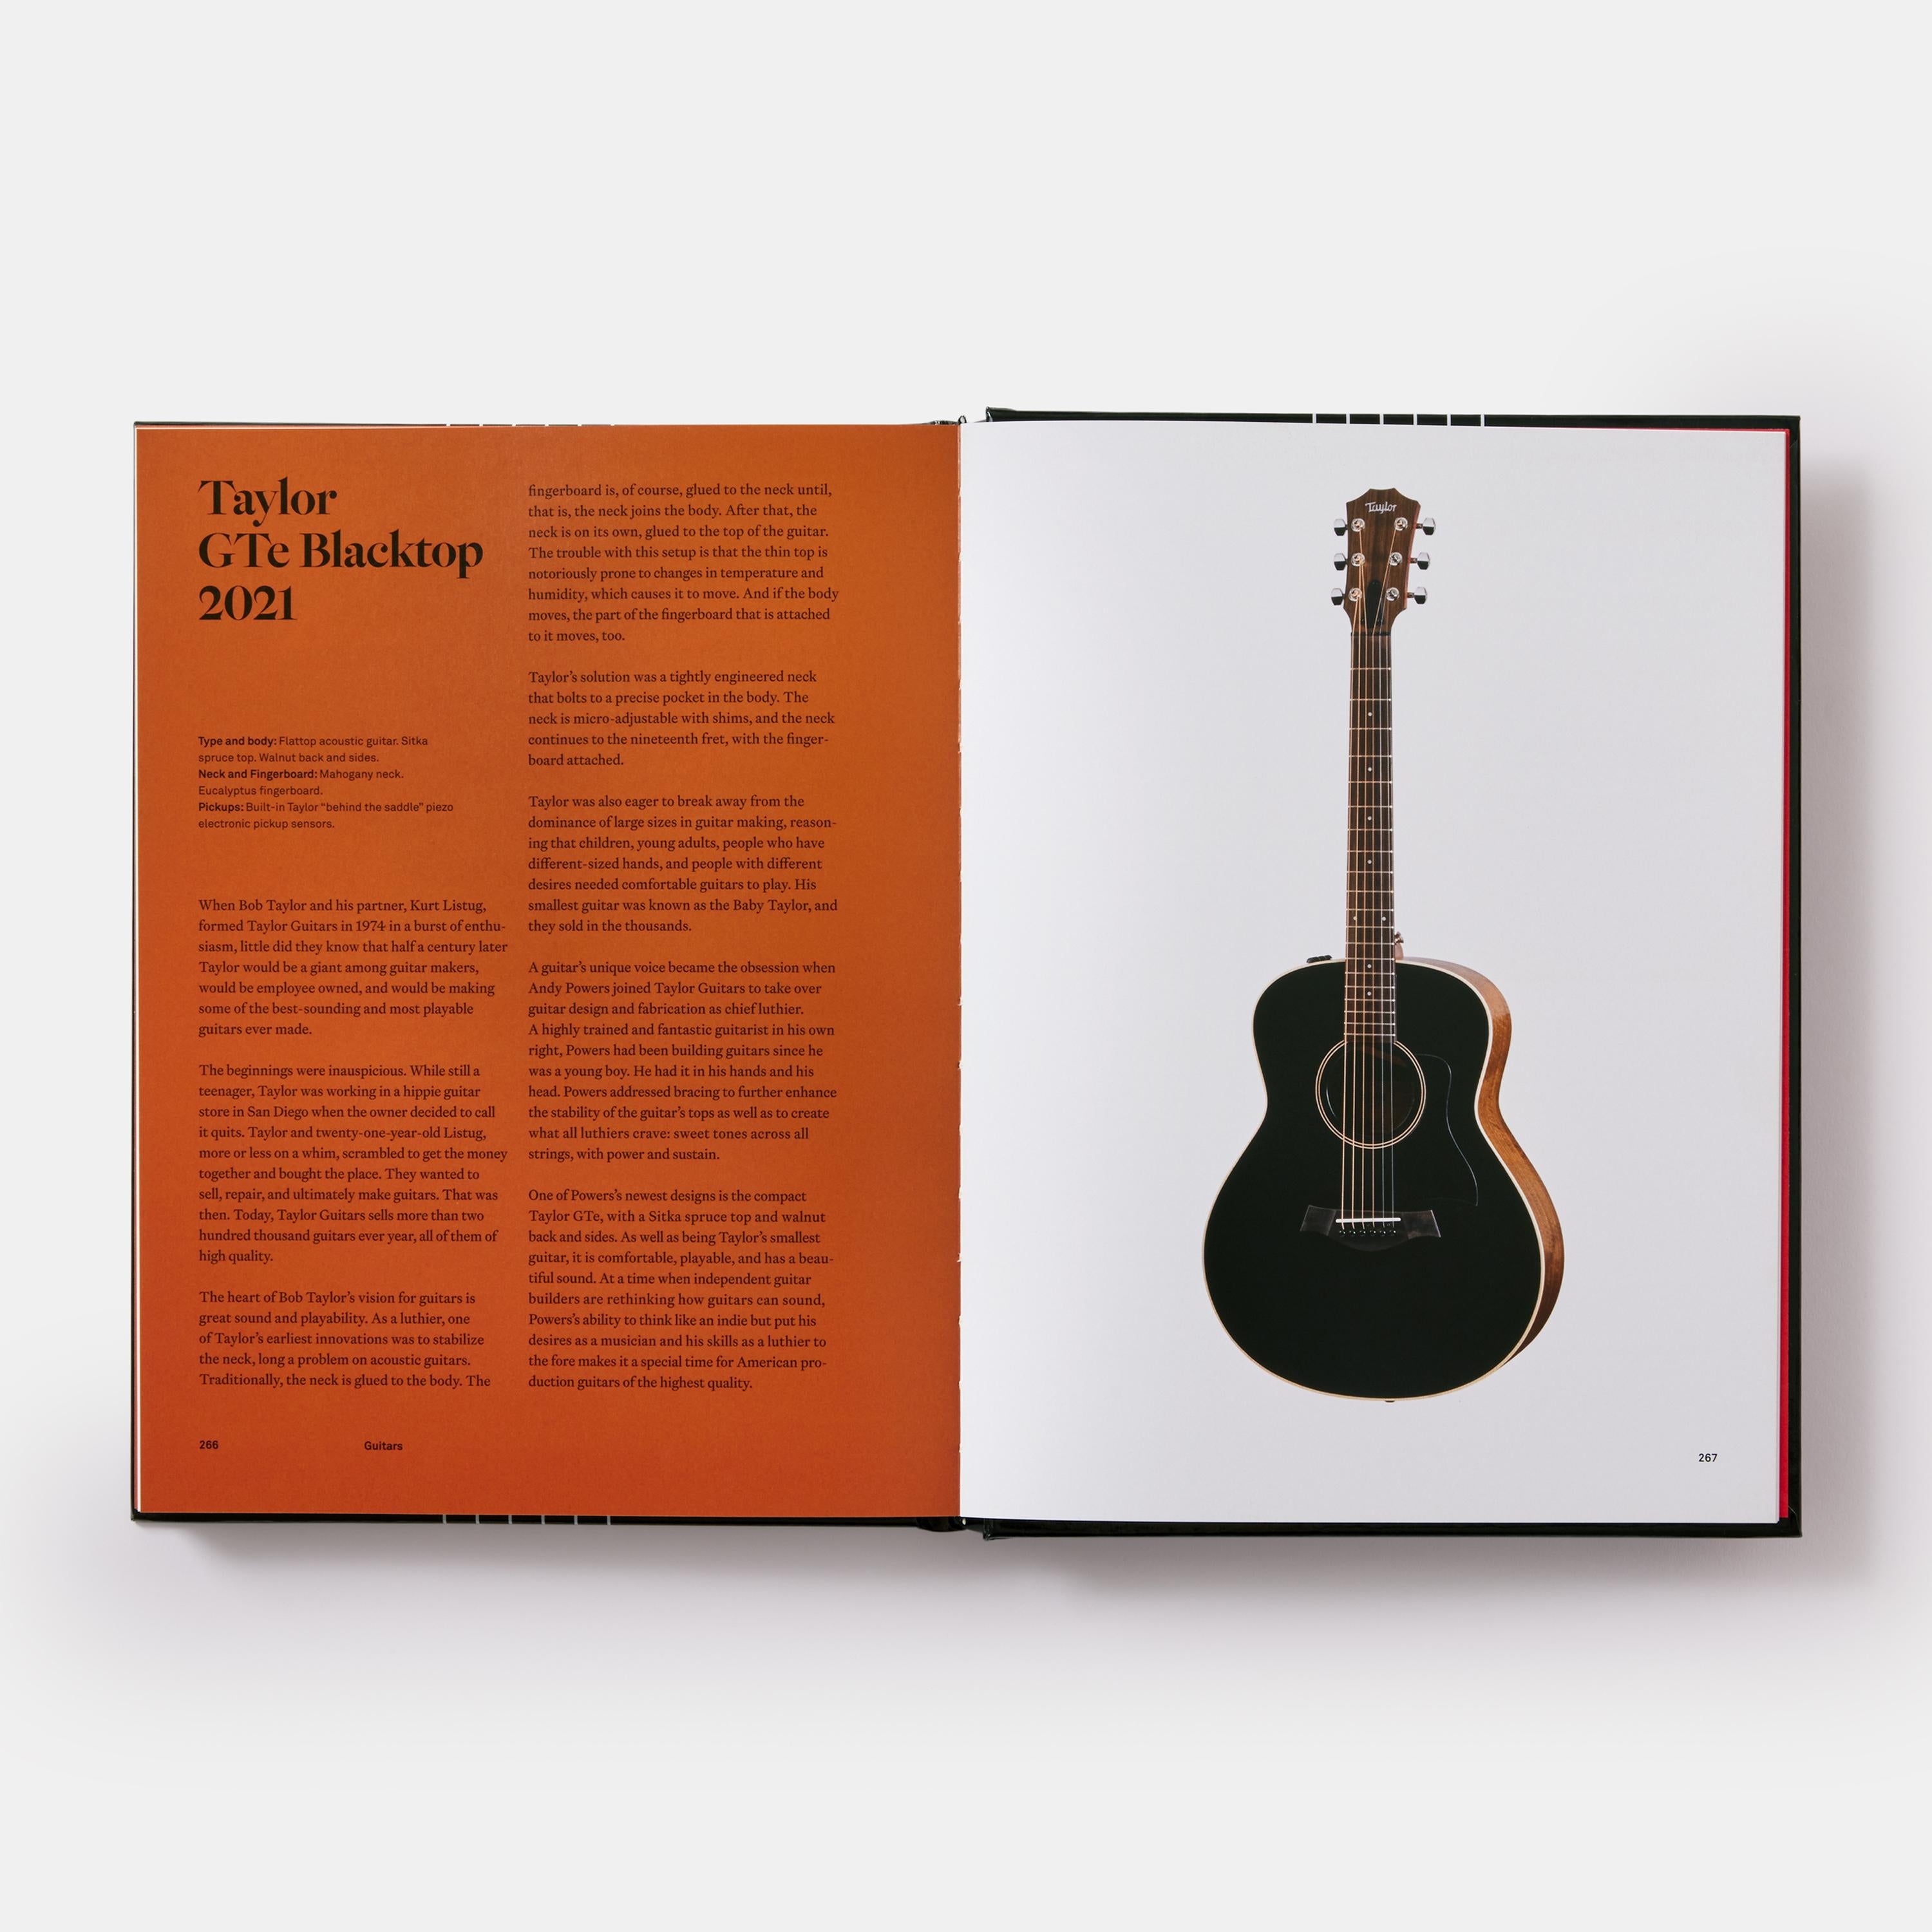 As seen in Harper’s Bazaar UK, Guitar World, and Design Week

The 100 most iconic guitars from around the globe, from early modern beginnings to cutting-edge electric models

The guitar is the iconic instrument at the heart of all popular music.